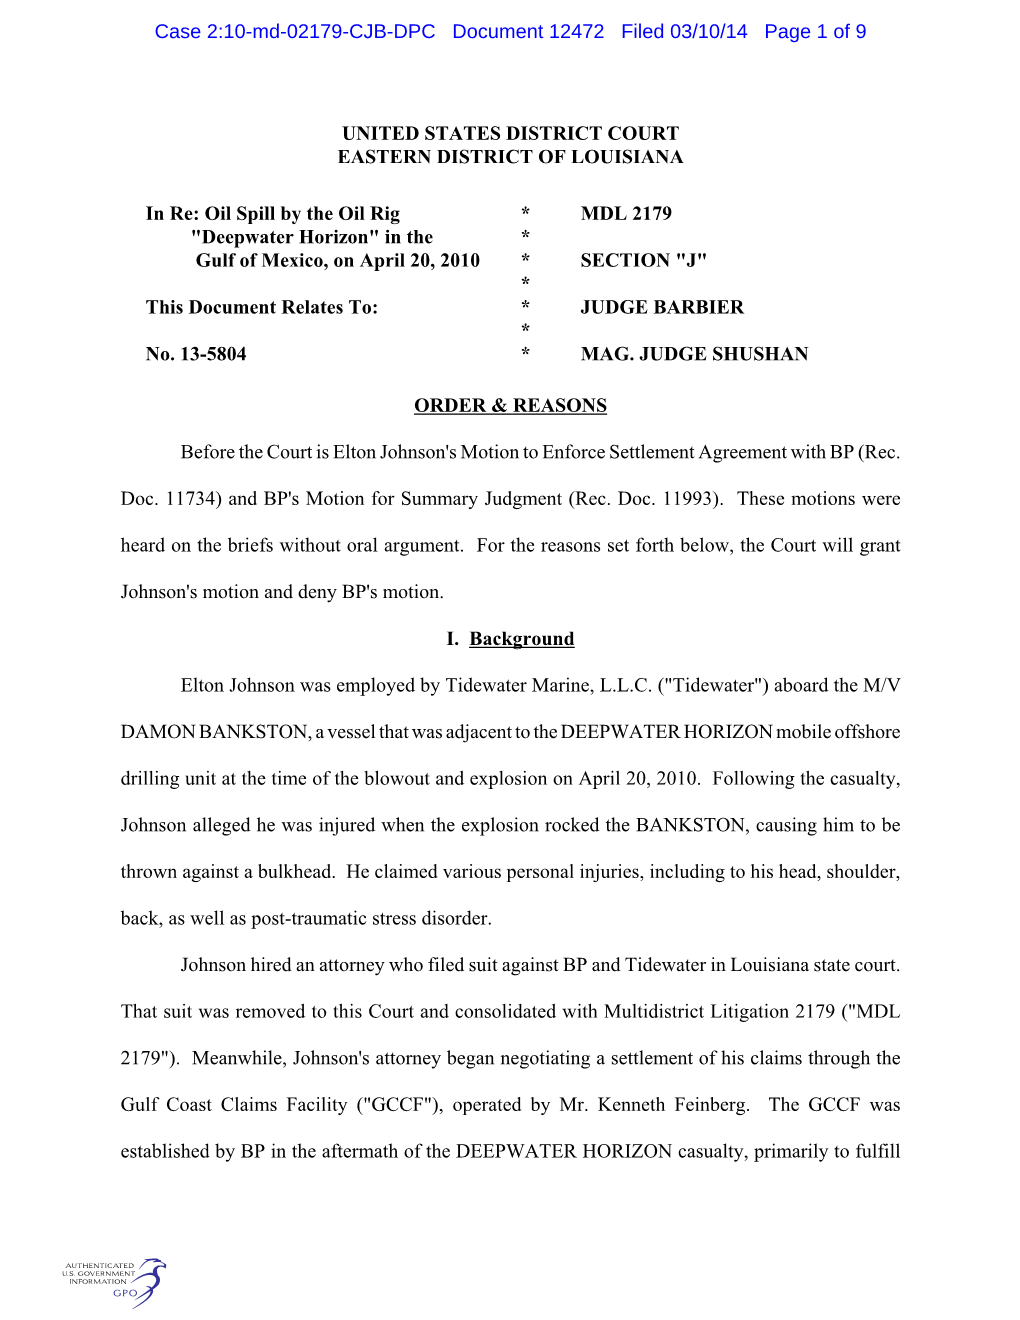 Case 2:10-Md-02179-CJB-DPC Document 12472 Filed 03/10/14 Page 1 of 9